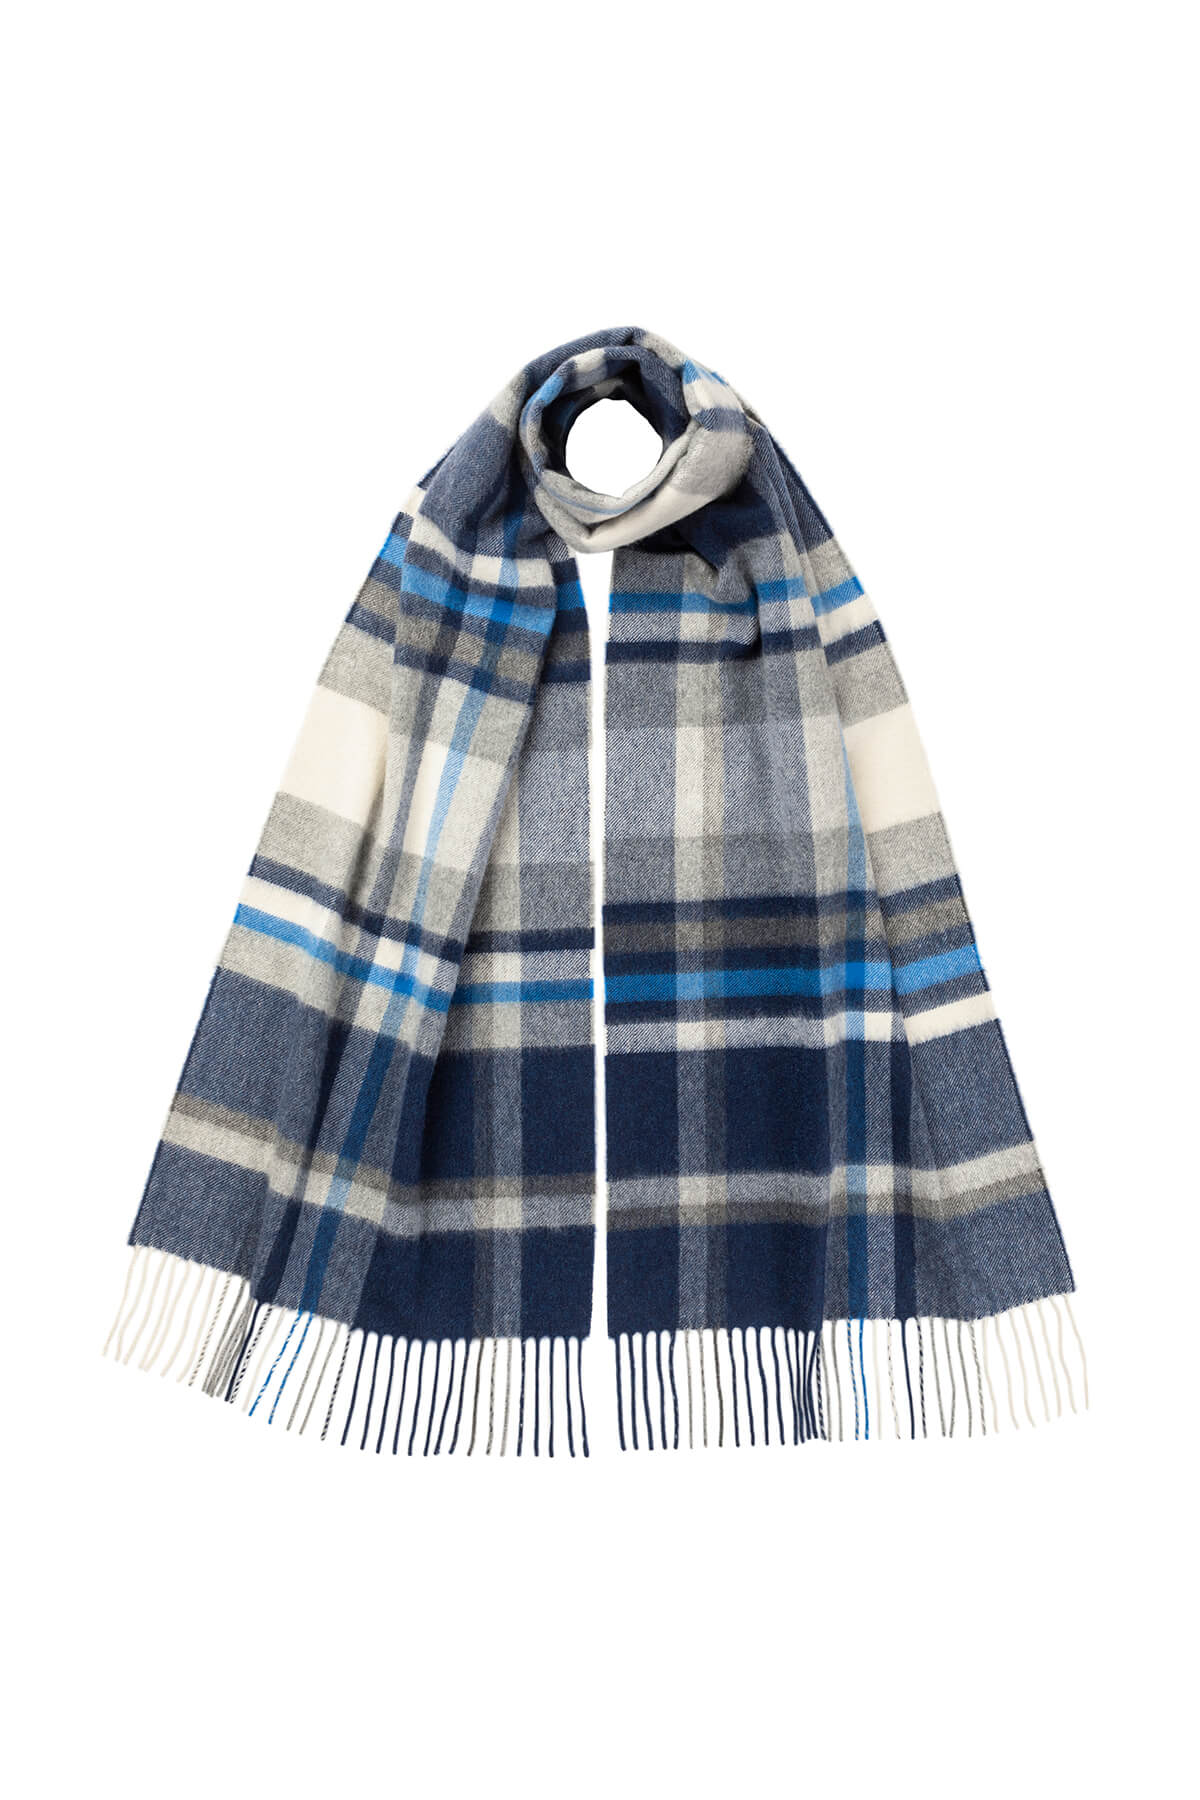 Johnstons of Elgin Cashmere Flannel Check Scarf in Blue on a white background WA000057RU7323ONE